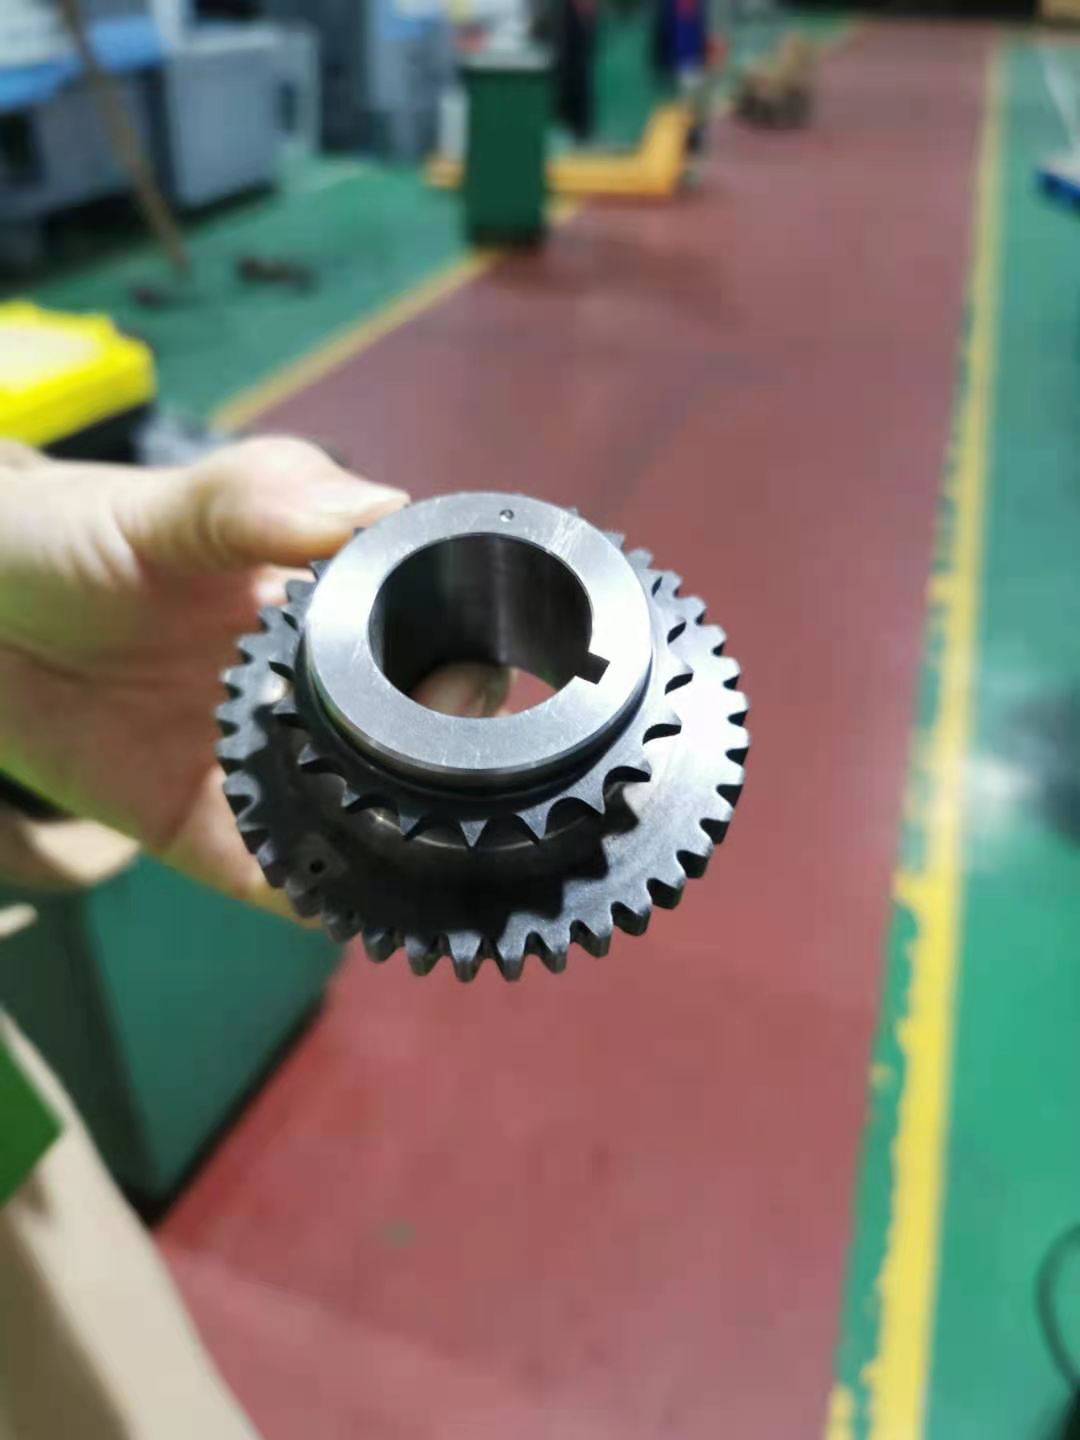 Case of carbon steel gear processing case